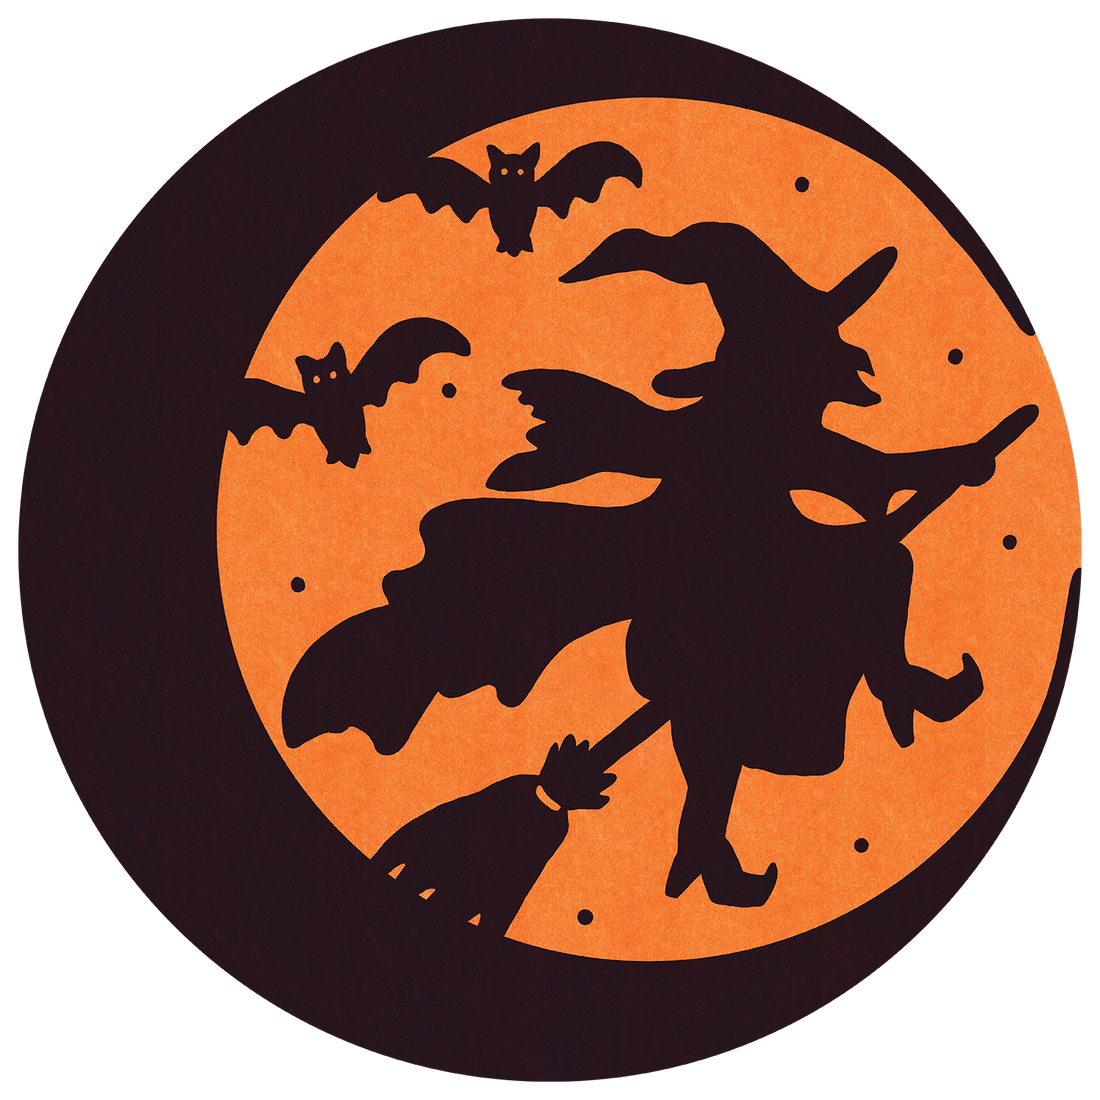 Die-cut placemat of a silhouette of a wicked witch on a broom, surrounded by bats, with an orange background and black crescent moon.